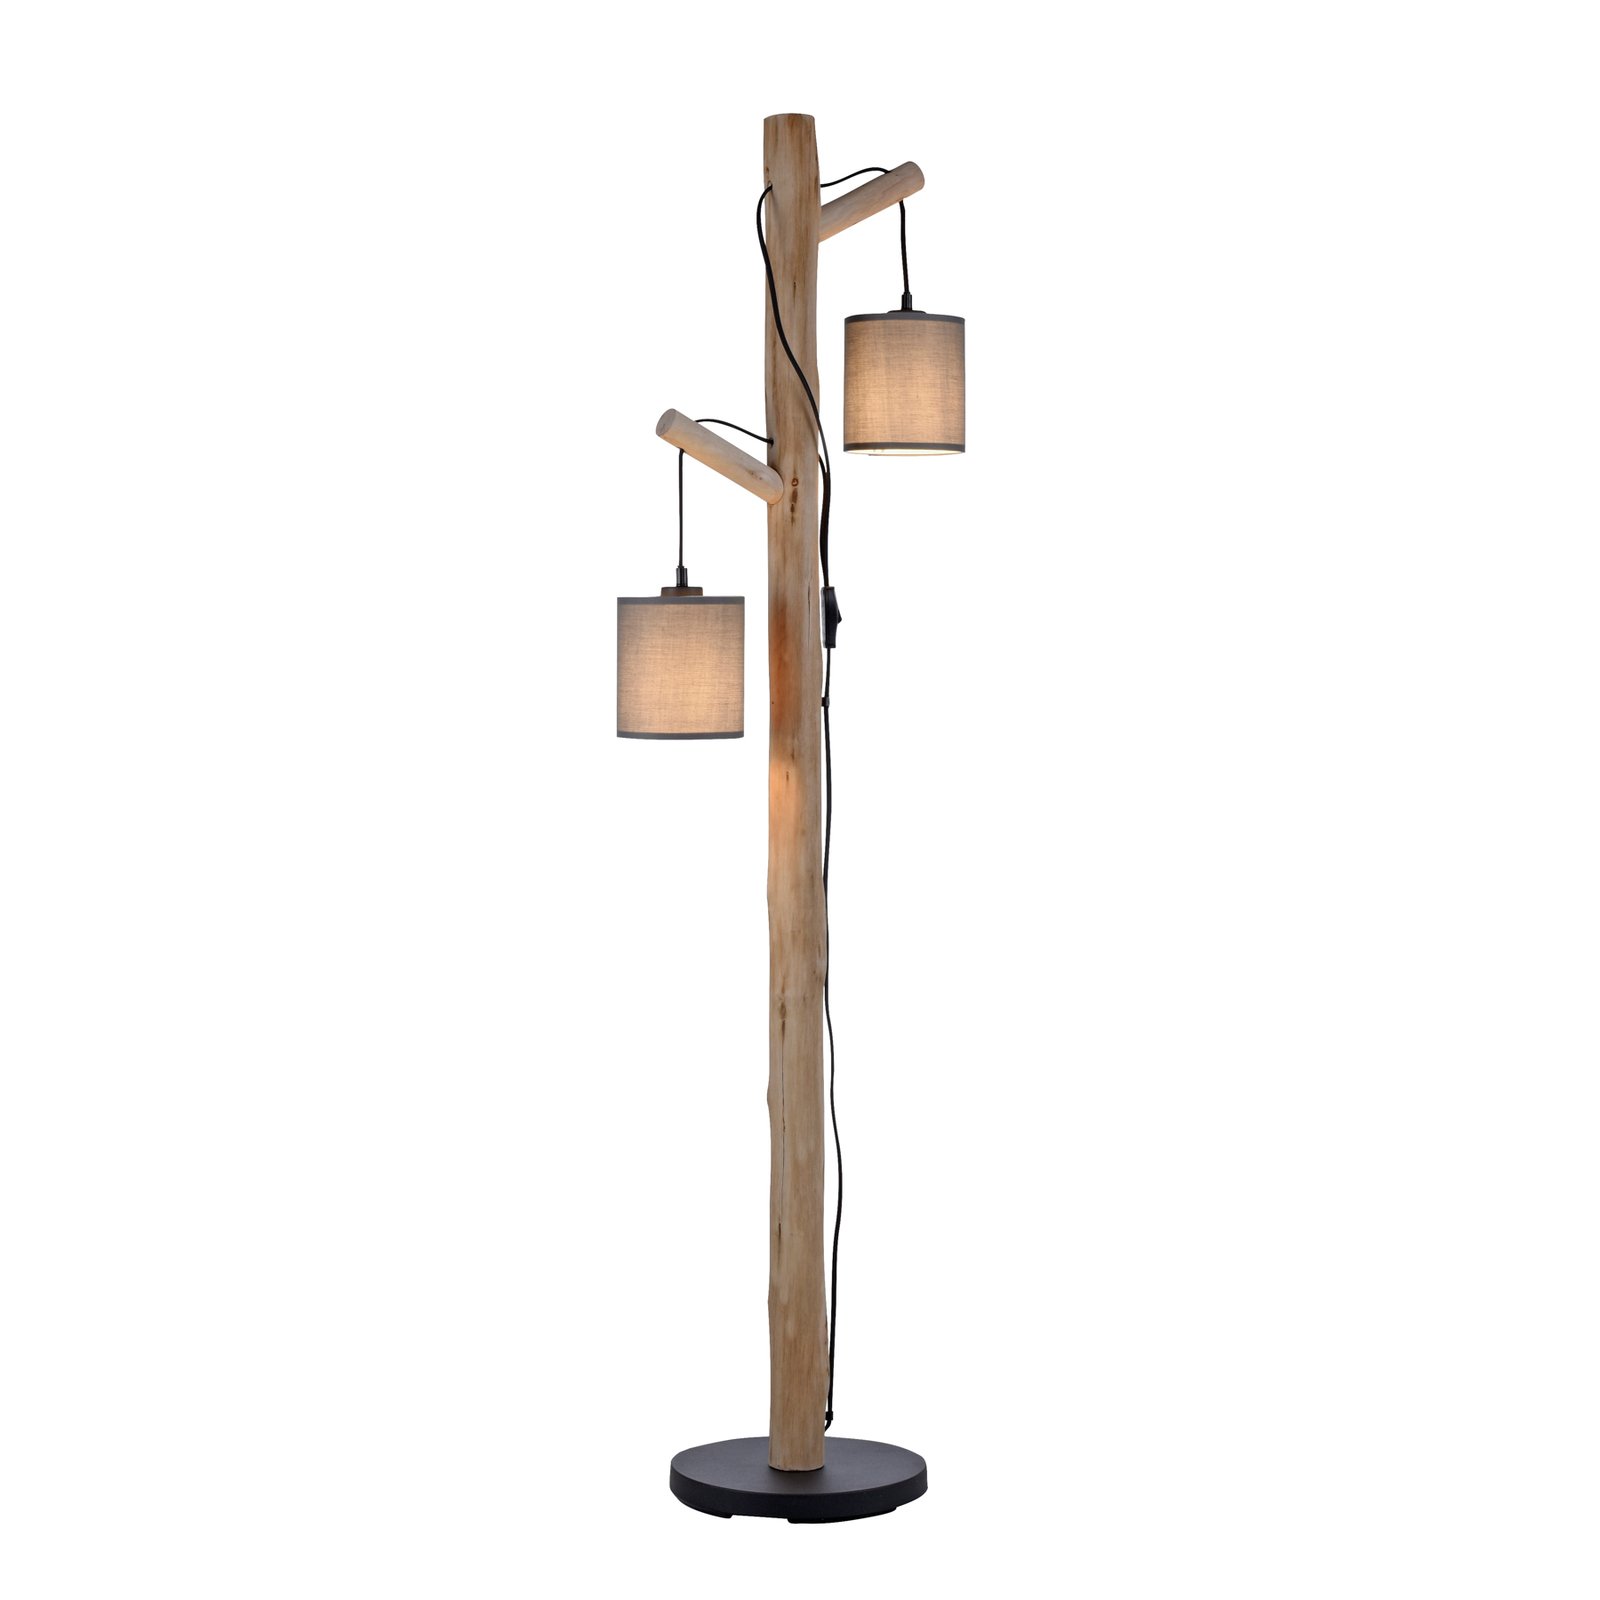 Green Tribu floor lamp with paper shades